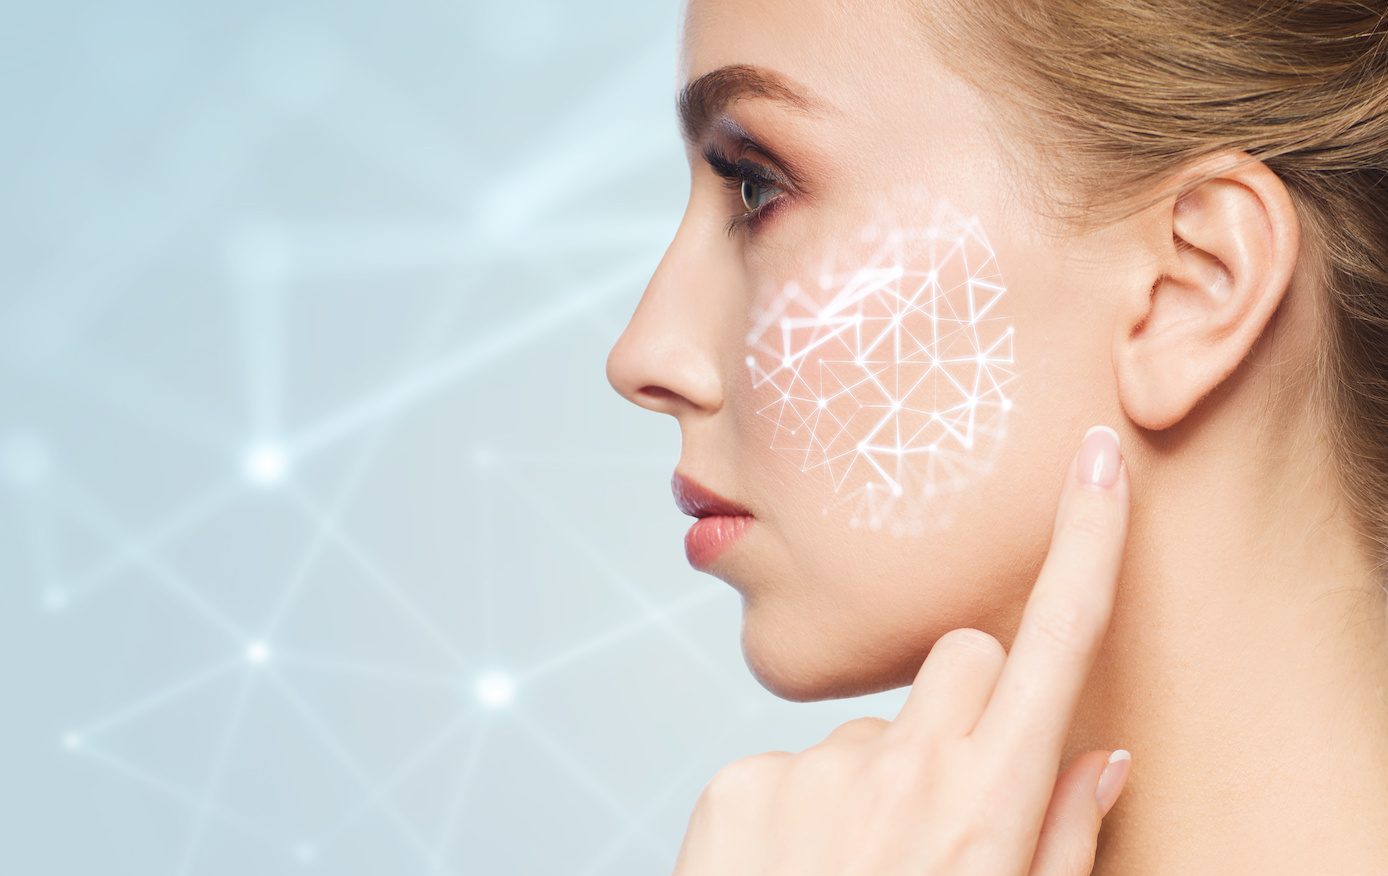 Advanced skin analysis course online from Pastiche. - Online Training for the beauty industry from Pastiche